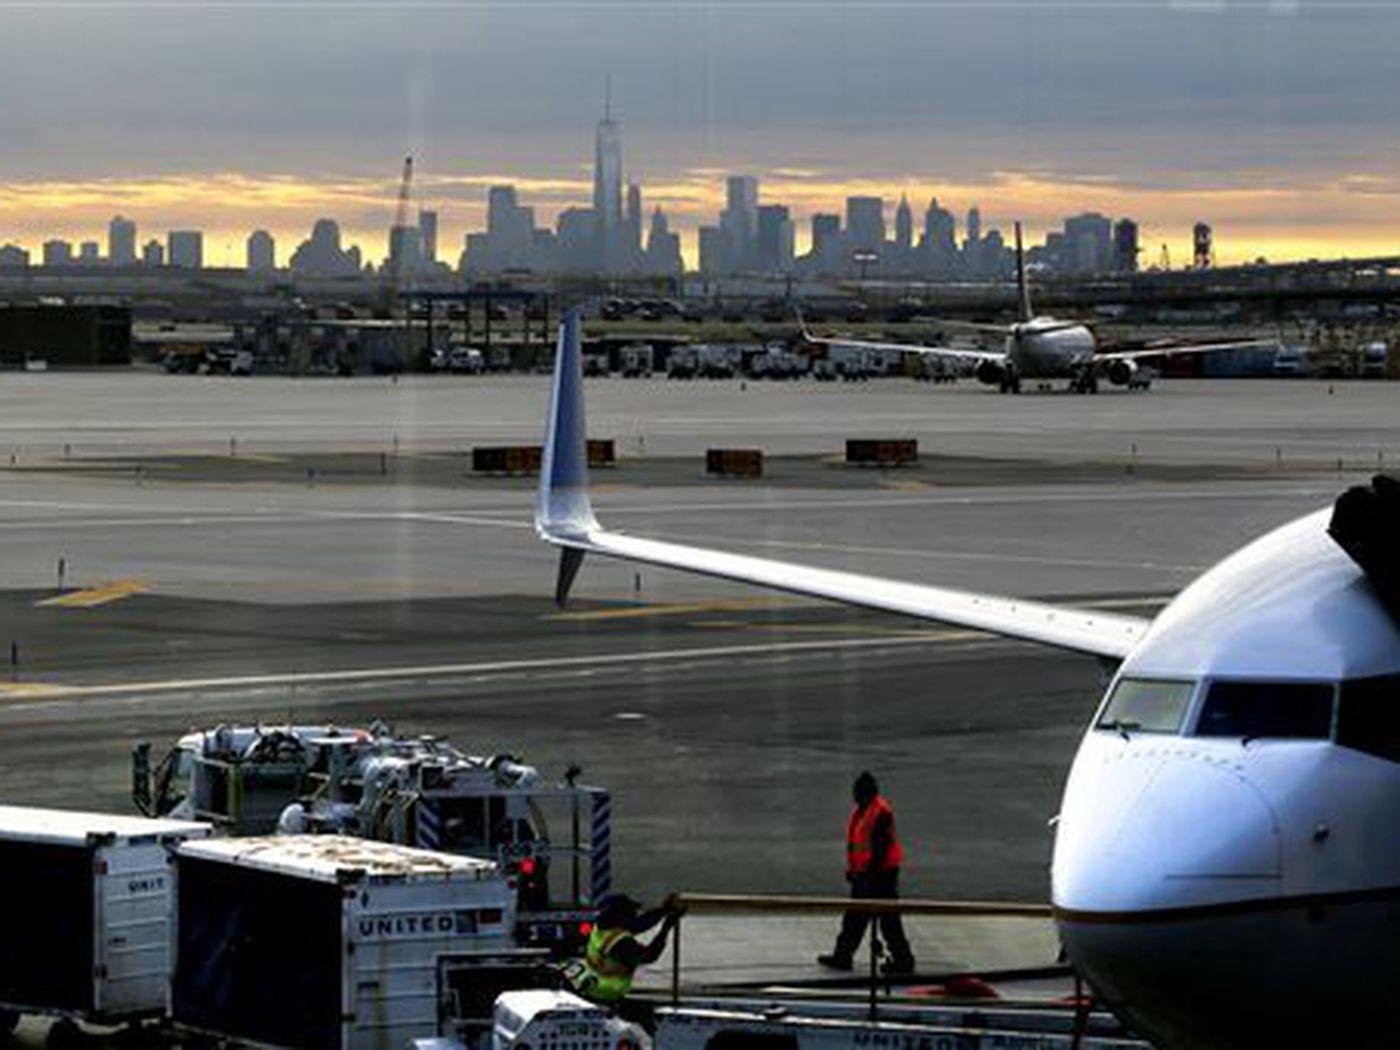 United abandons deal to add more slots at Newark airport